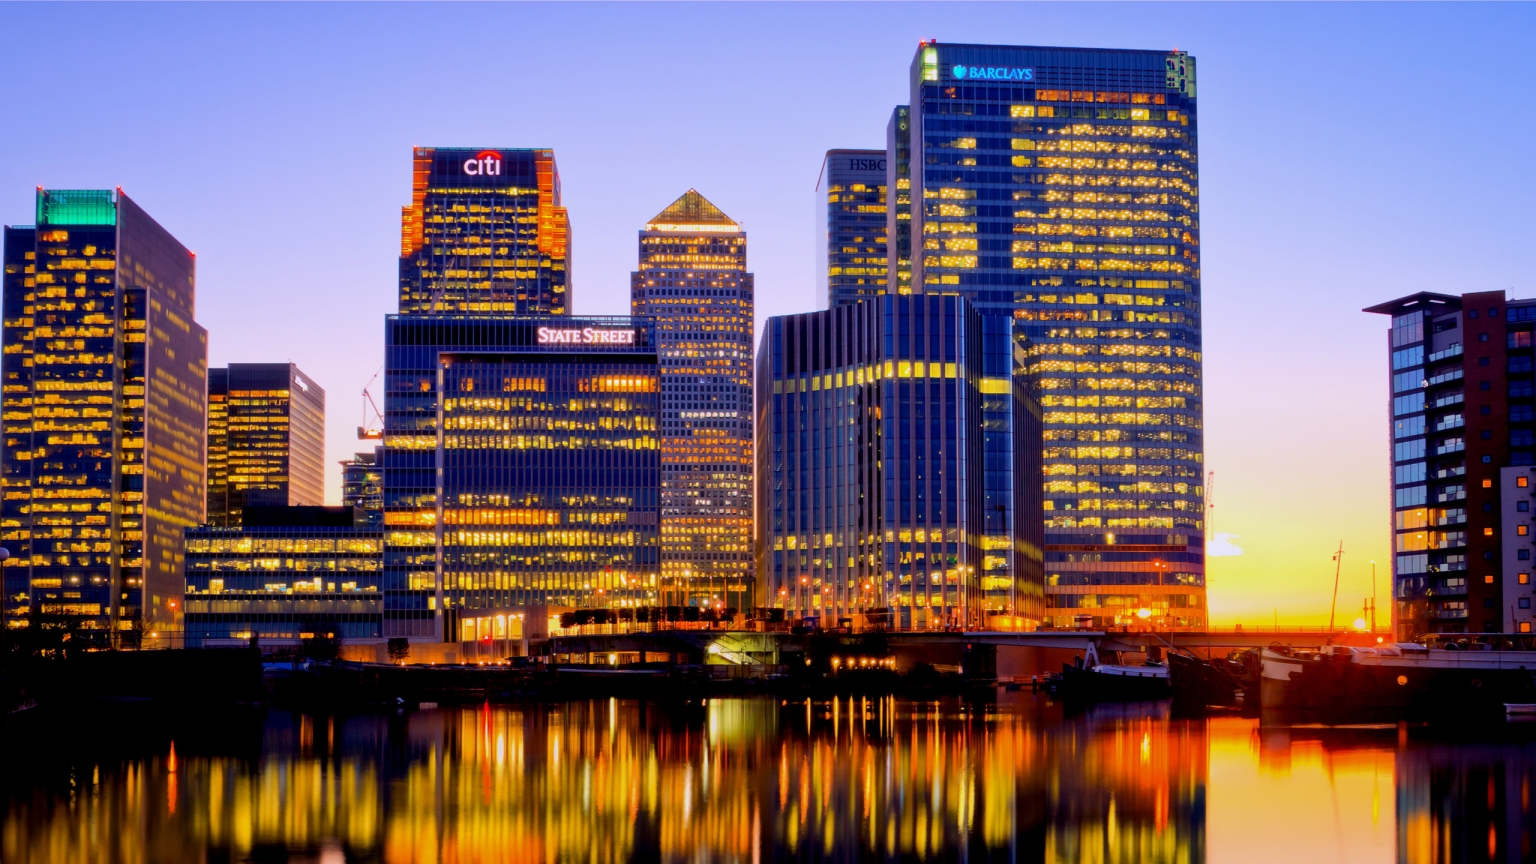 London Canary Wharf for 1536 x 864 HDTV resolution